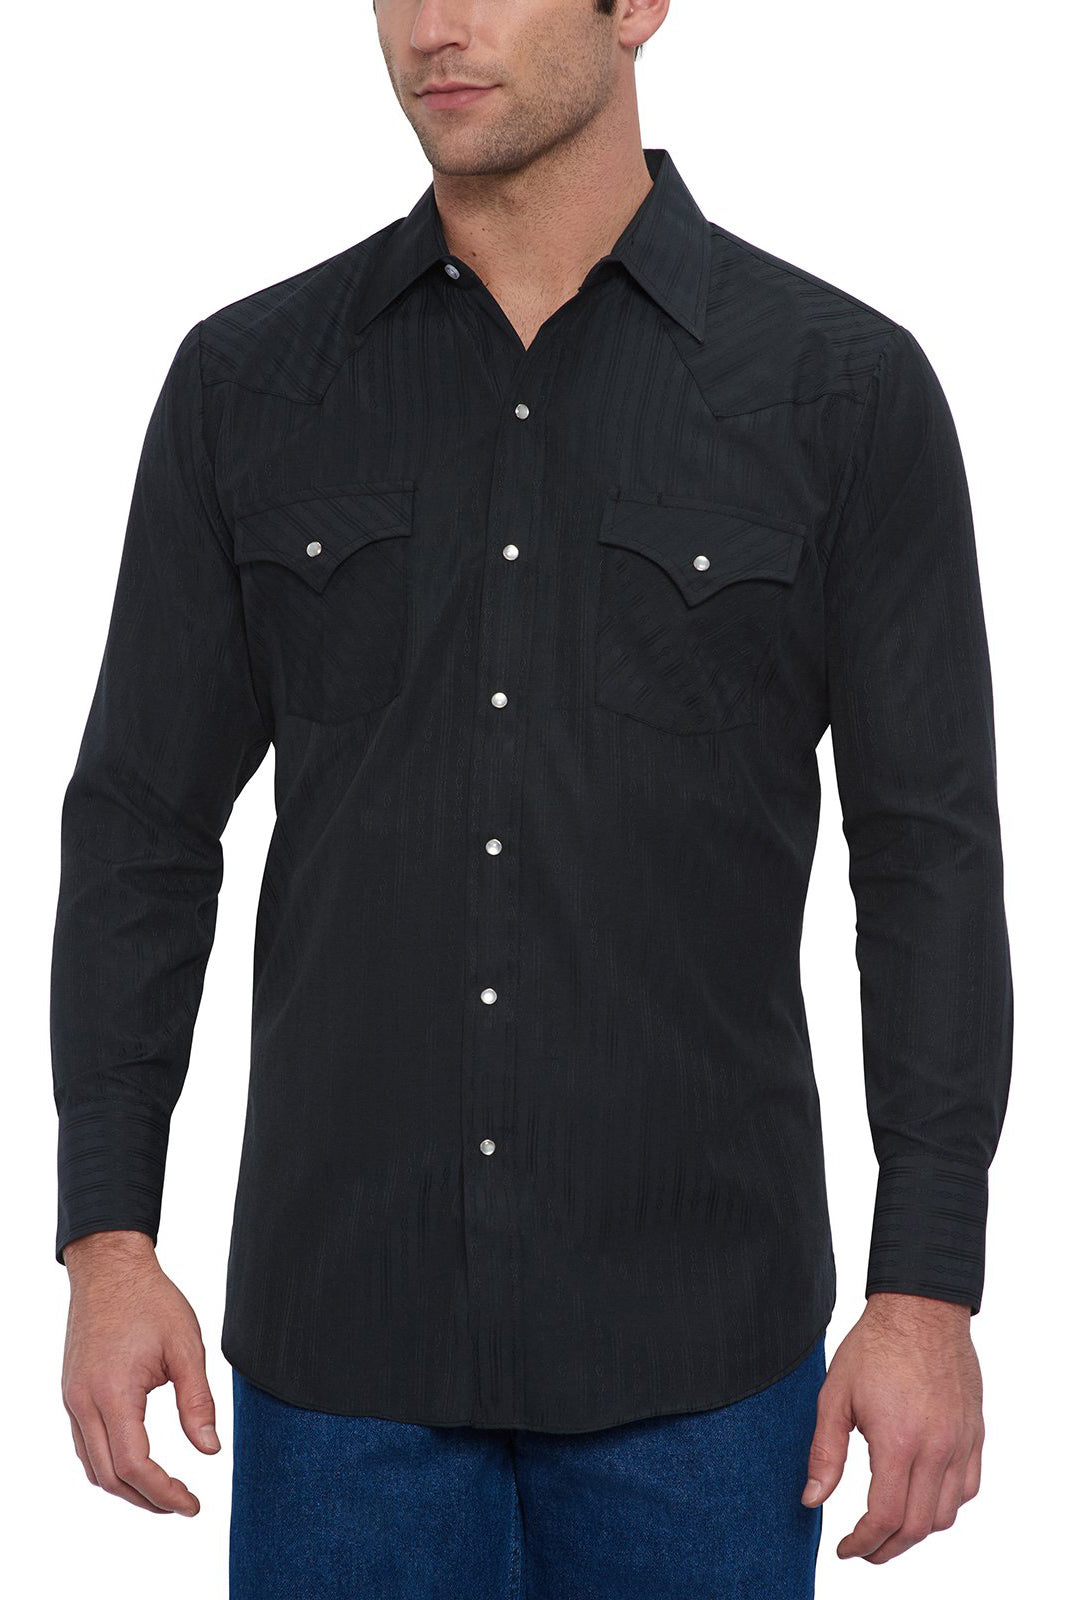 Men's Long Sleeve Tone on Tone Western Shirt | Ely Cattleman® Official